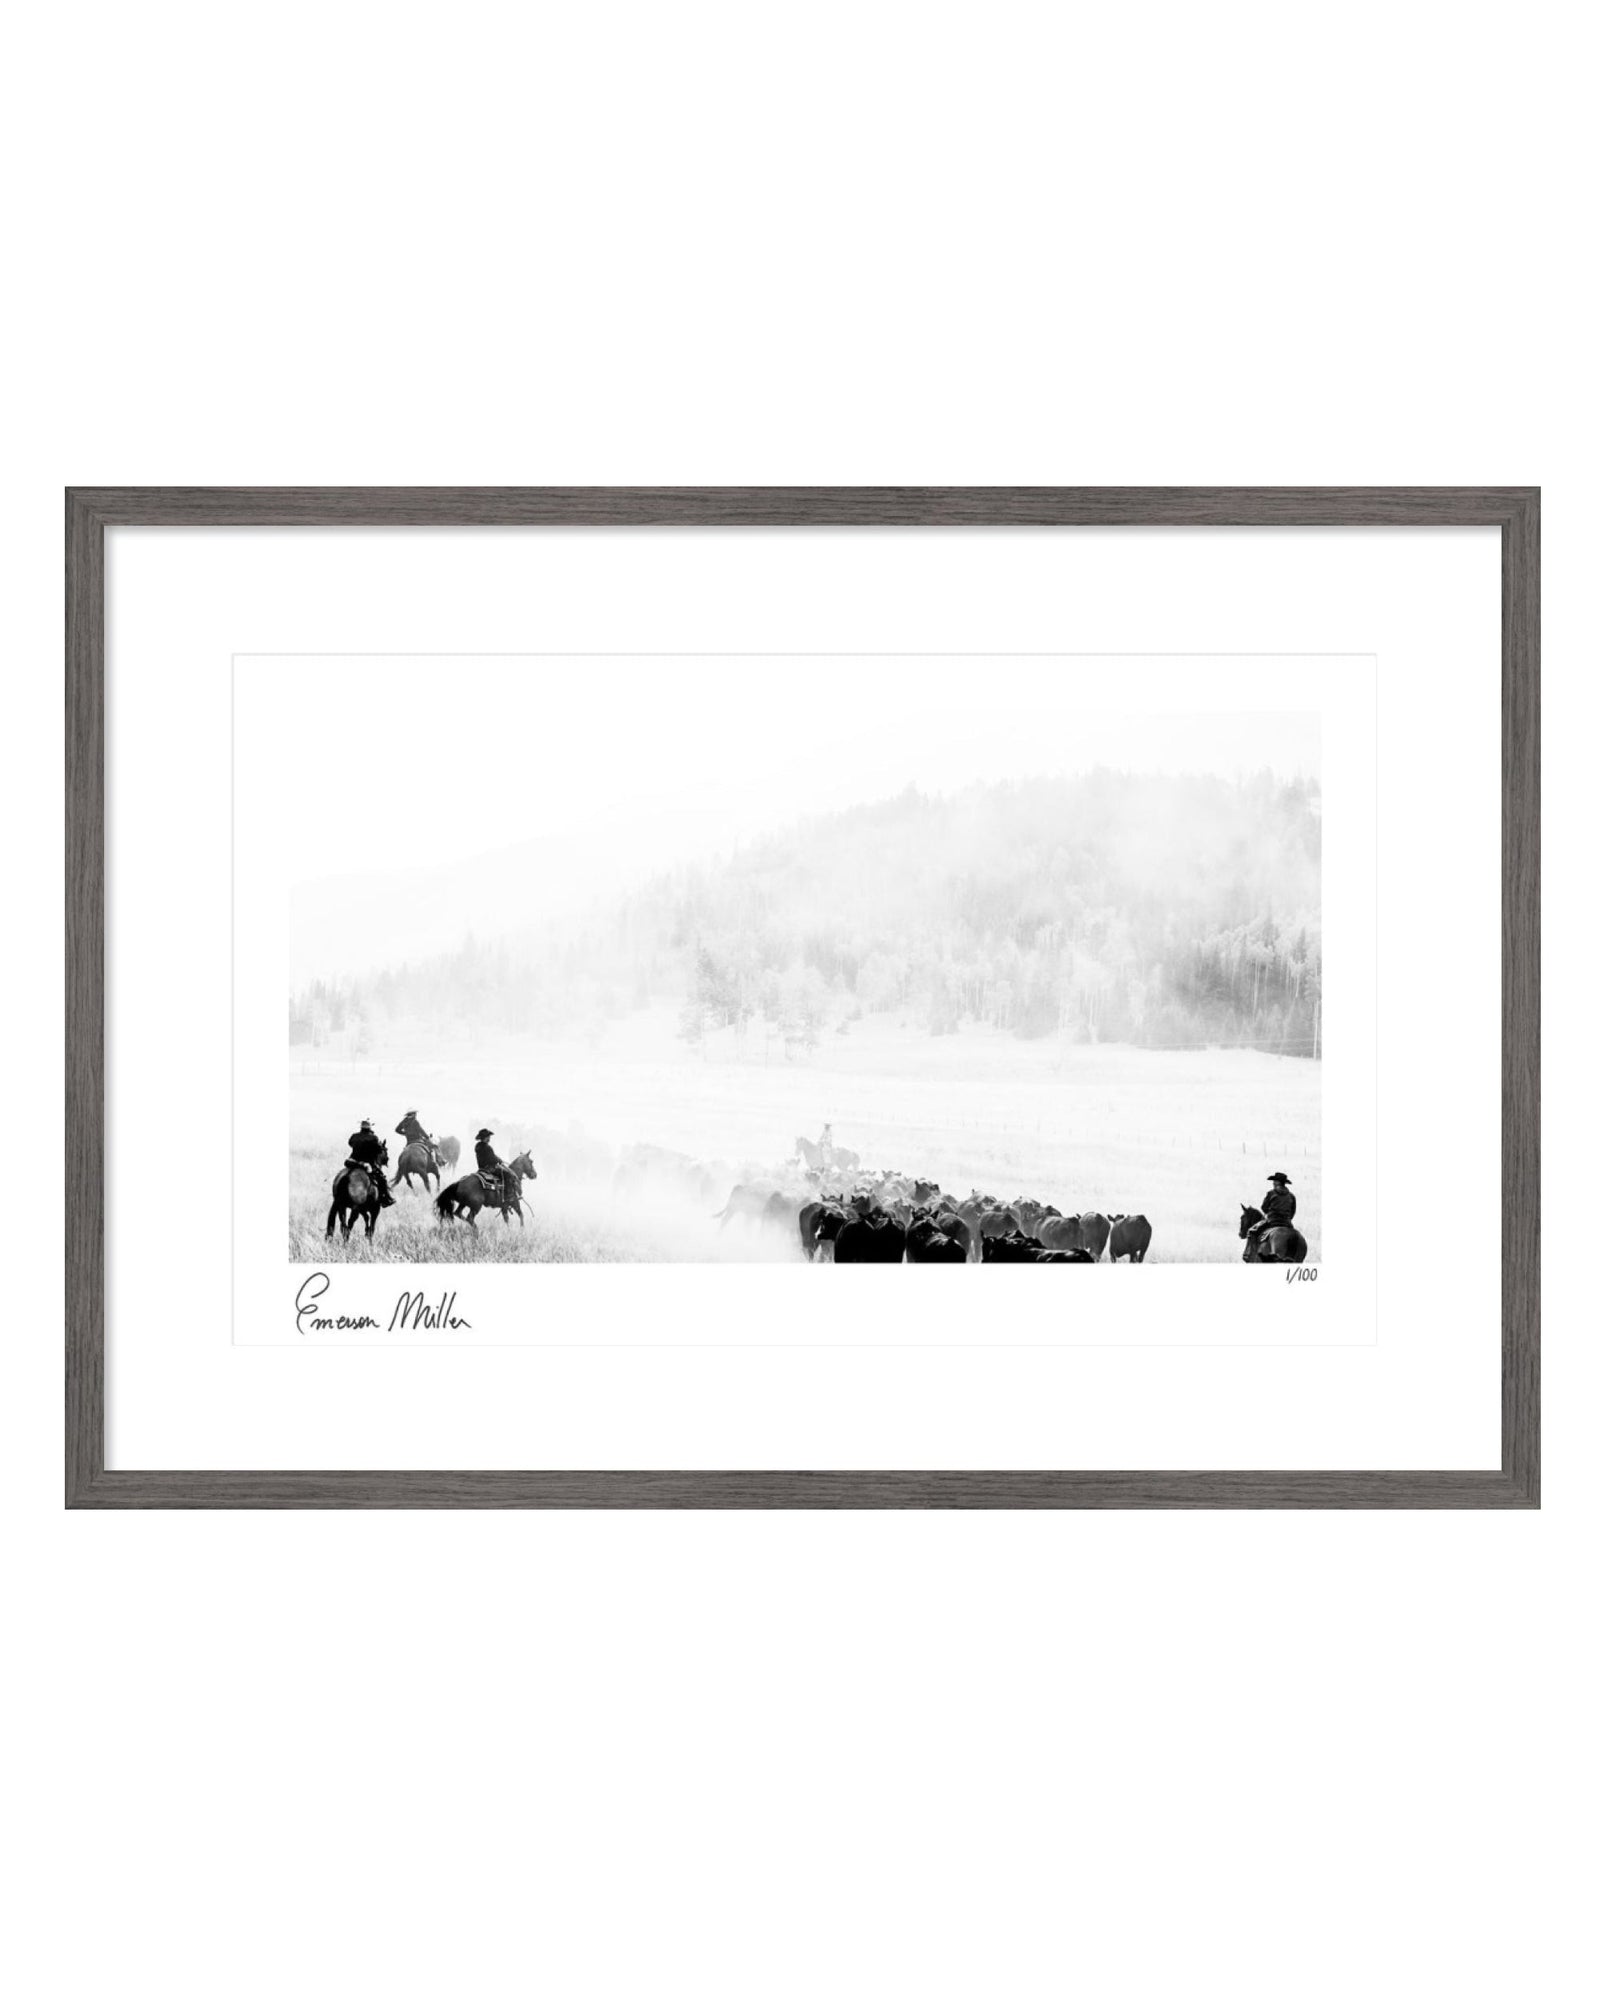 Cattle Drive 1 by Yellowstone Set Photographer Emerson "Paco" Miller (Signed and Numbered)